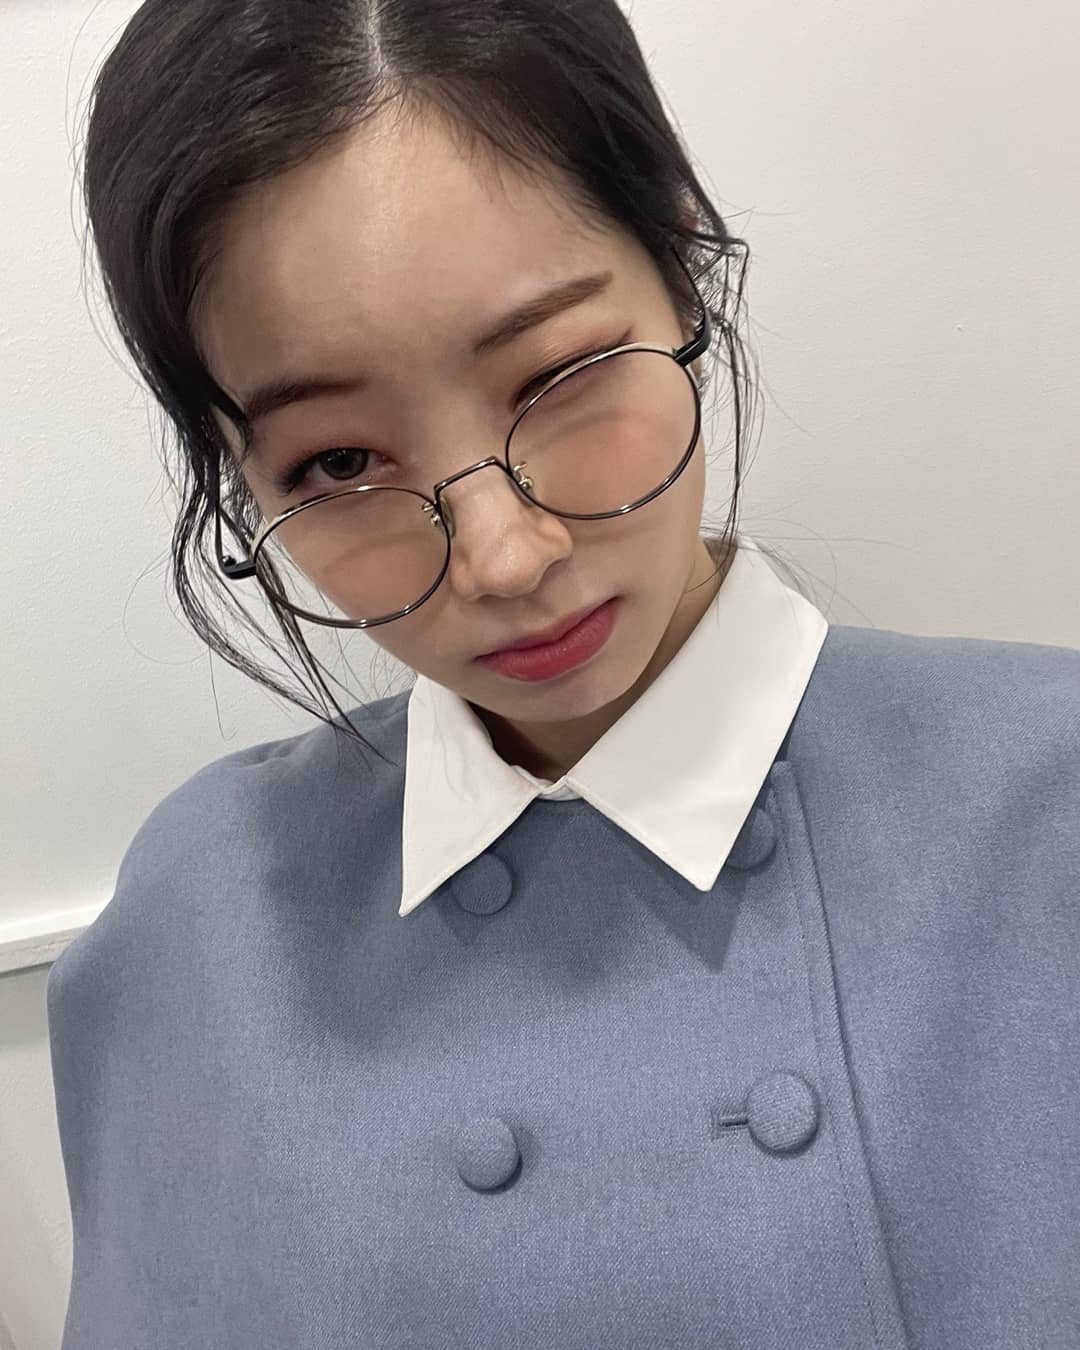 TWICE Dahyun, beautiful even with glasses on.. Heart melting aegyo